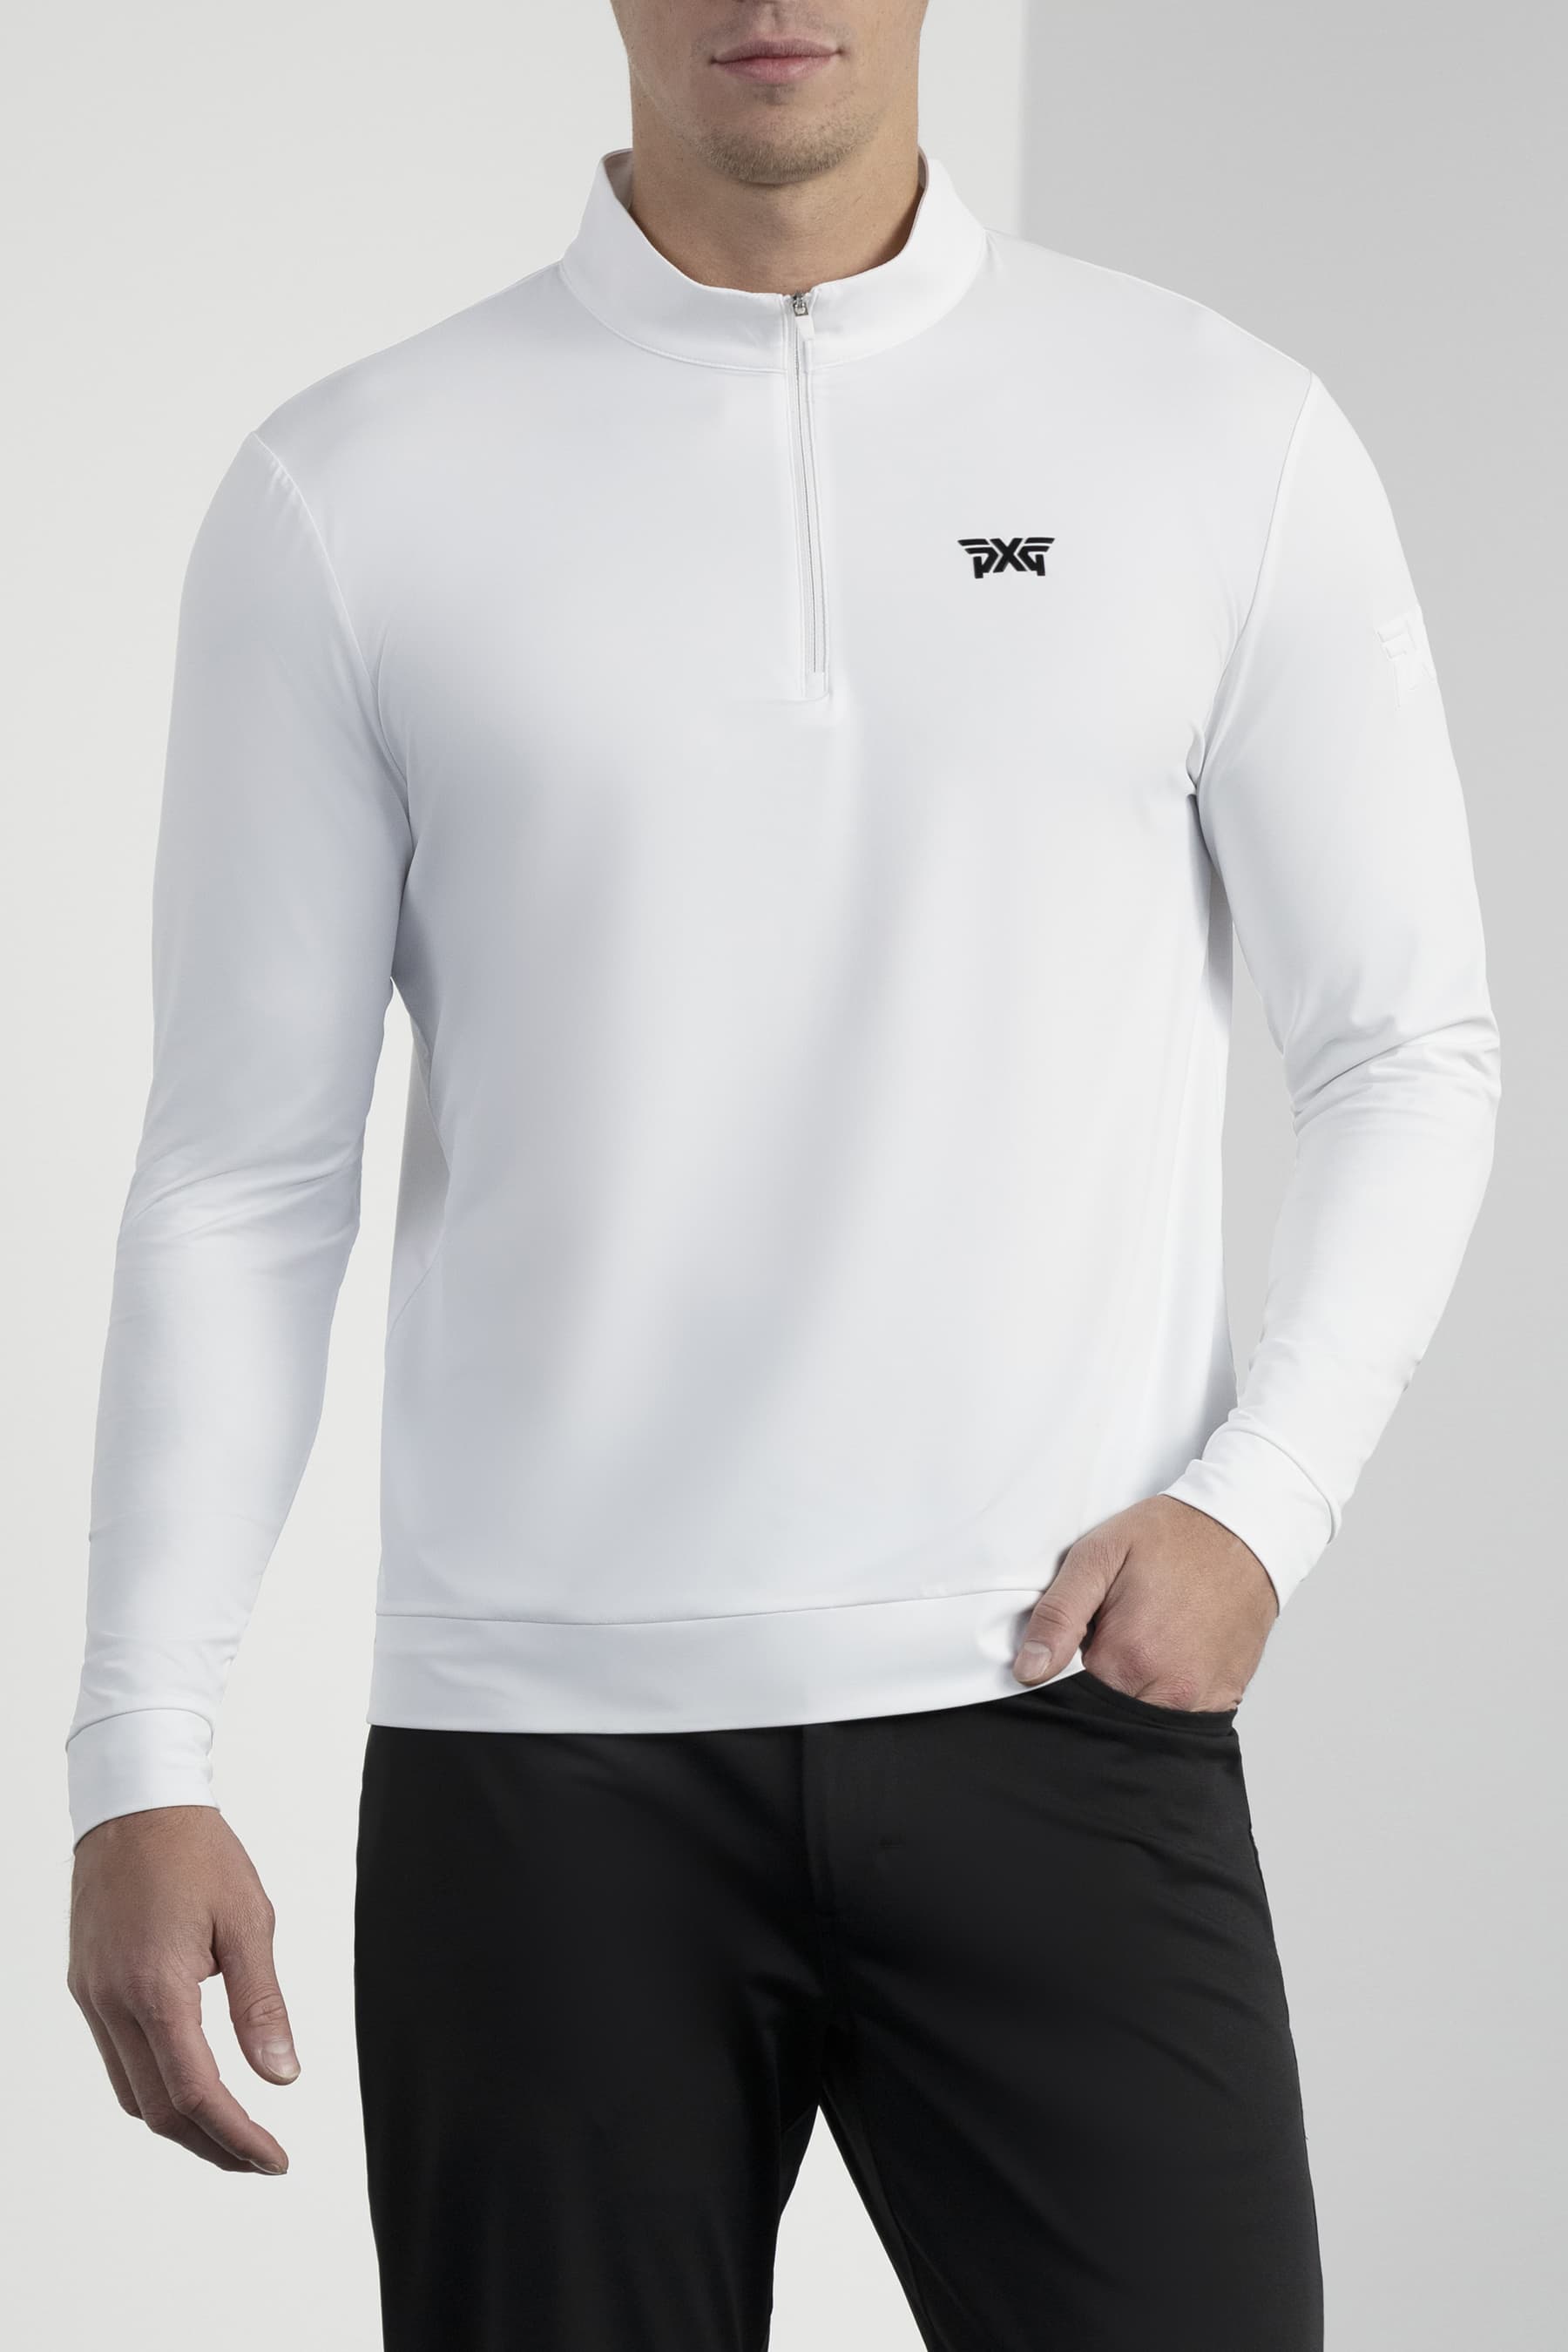 artilleri Anslået Få Essential Pullover | Shop the Highest Quality Golf Apparel, Gear,  Accessories and Golf Clubs at PXG